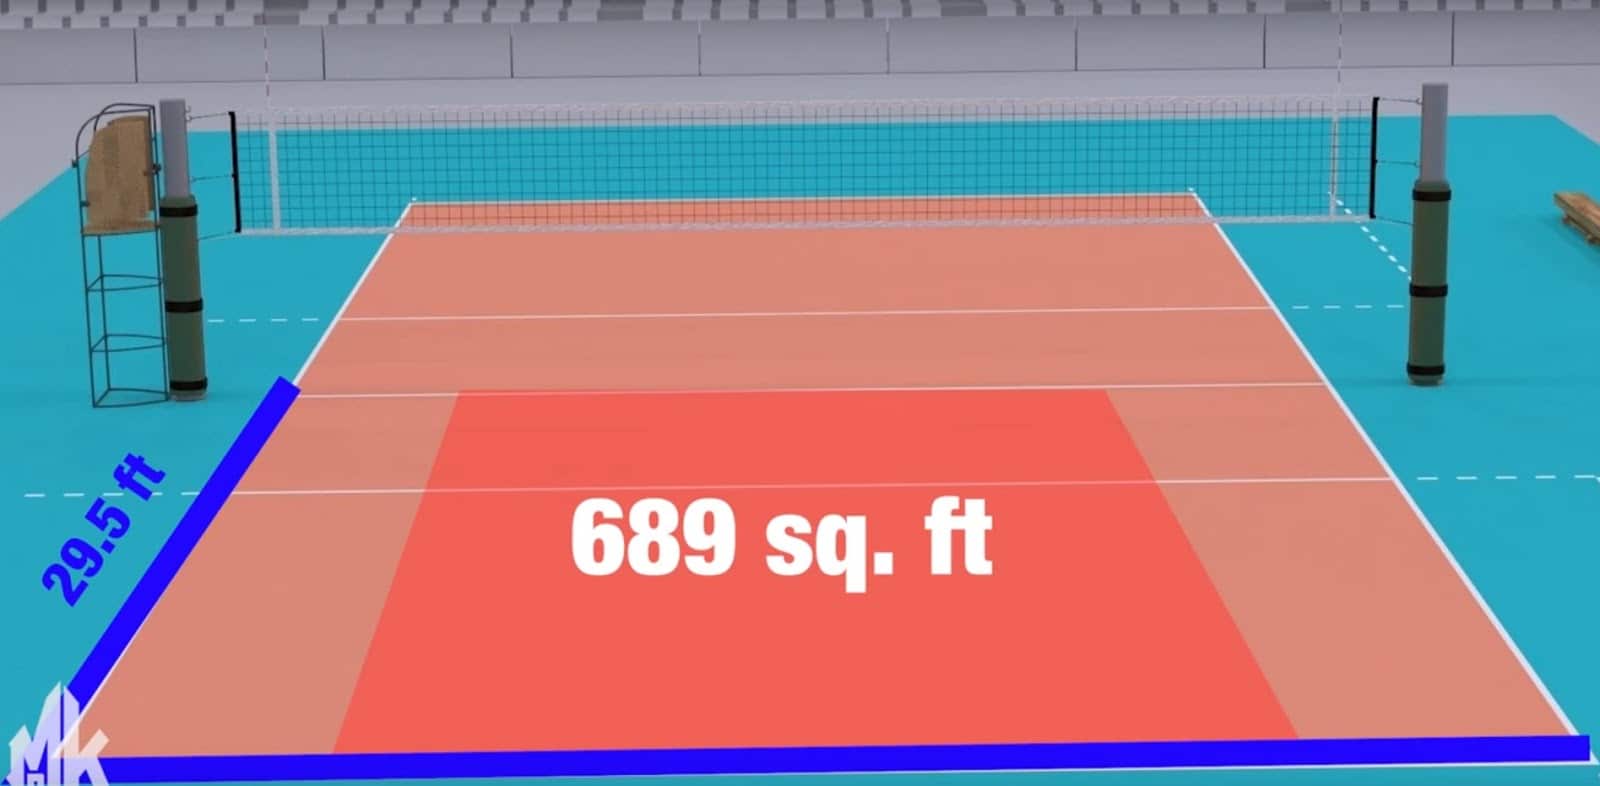 Volleyball court sizes